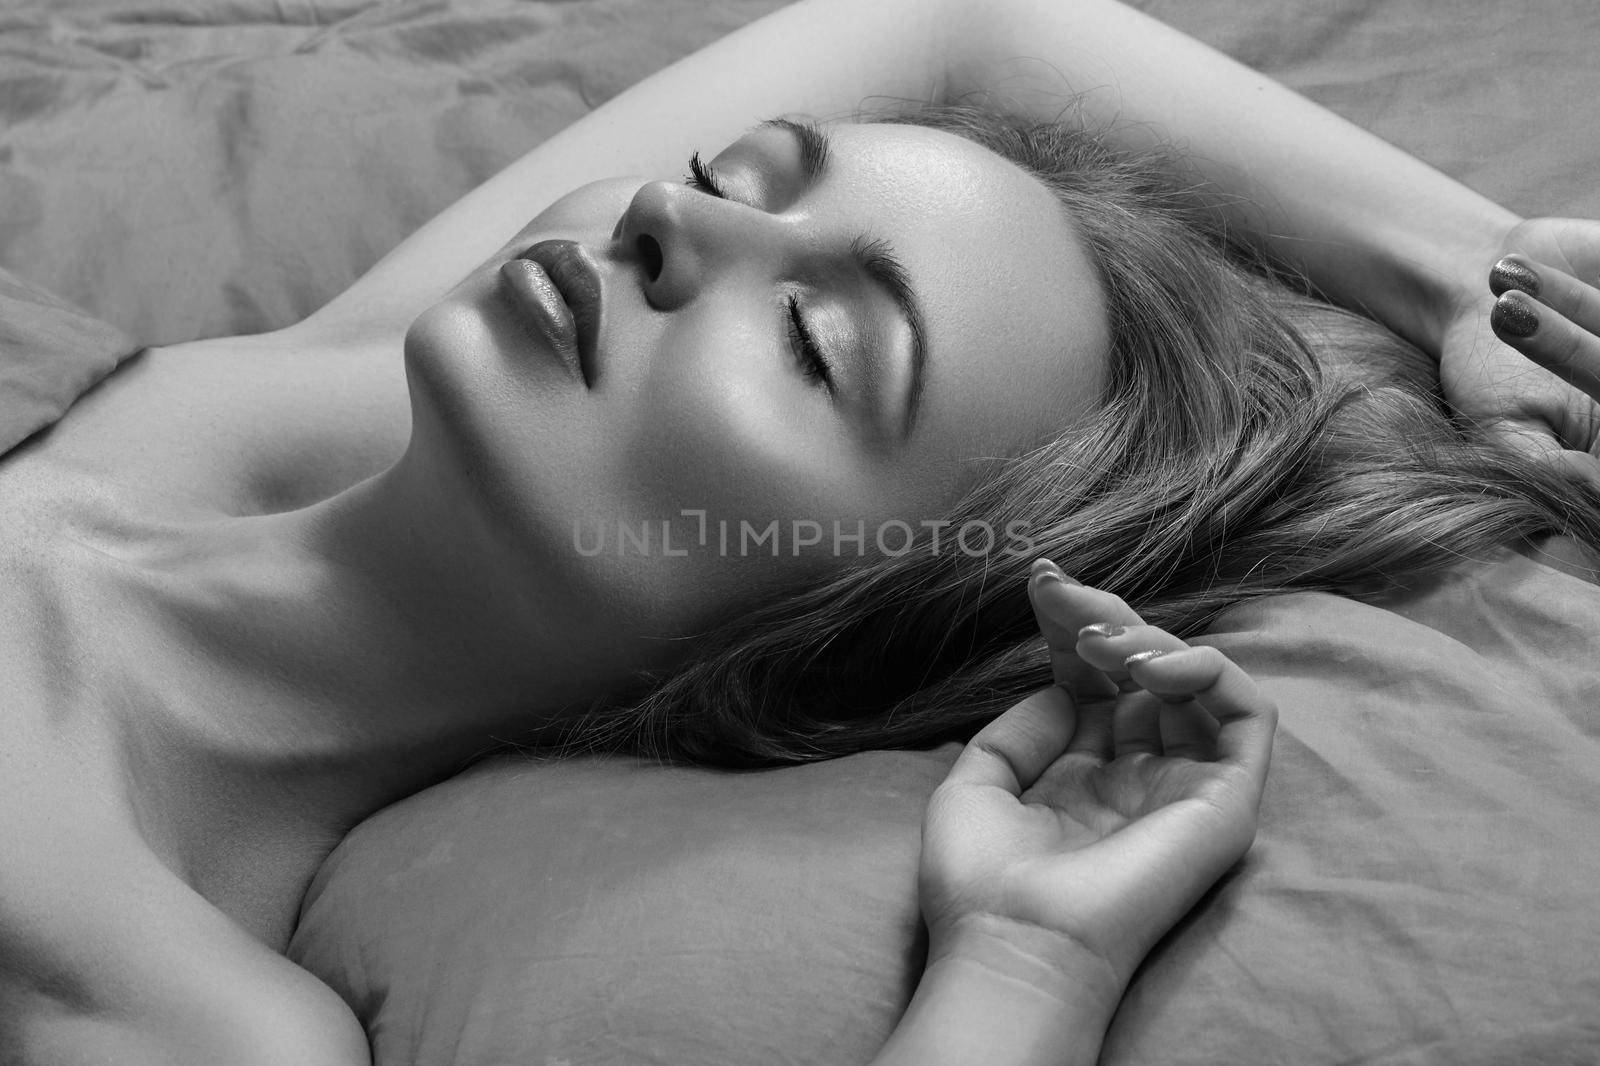 Beautiful Woman Sleeping while lying in Bed with Comfort. Sweet dreams. Sexy model with long curly hair relaxing on grey sheets. Black and white photo